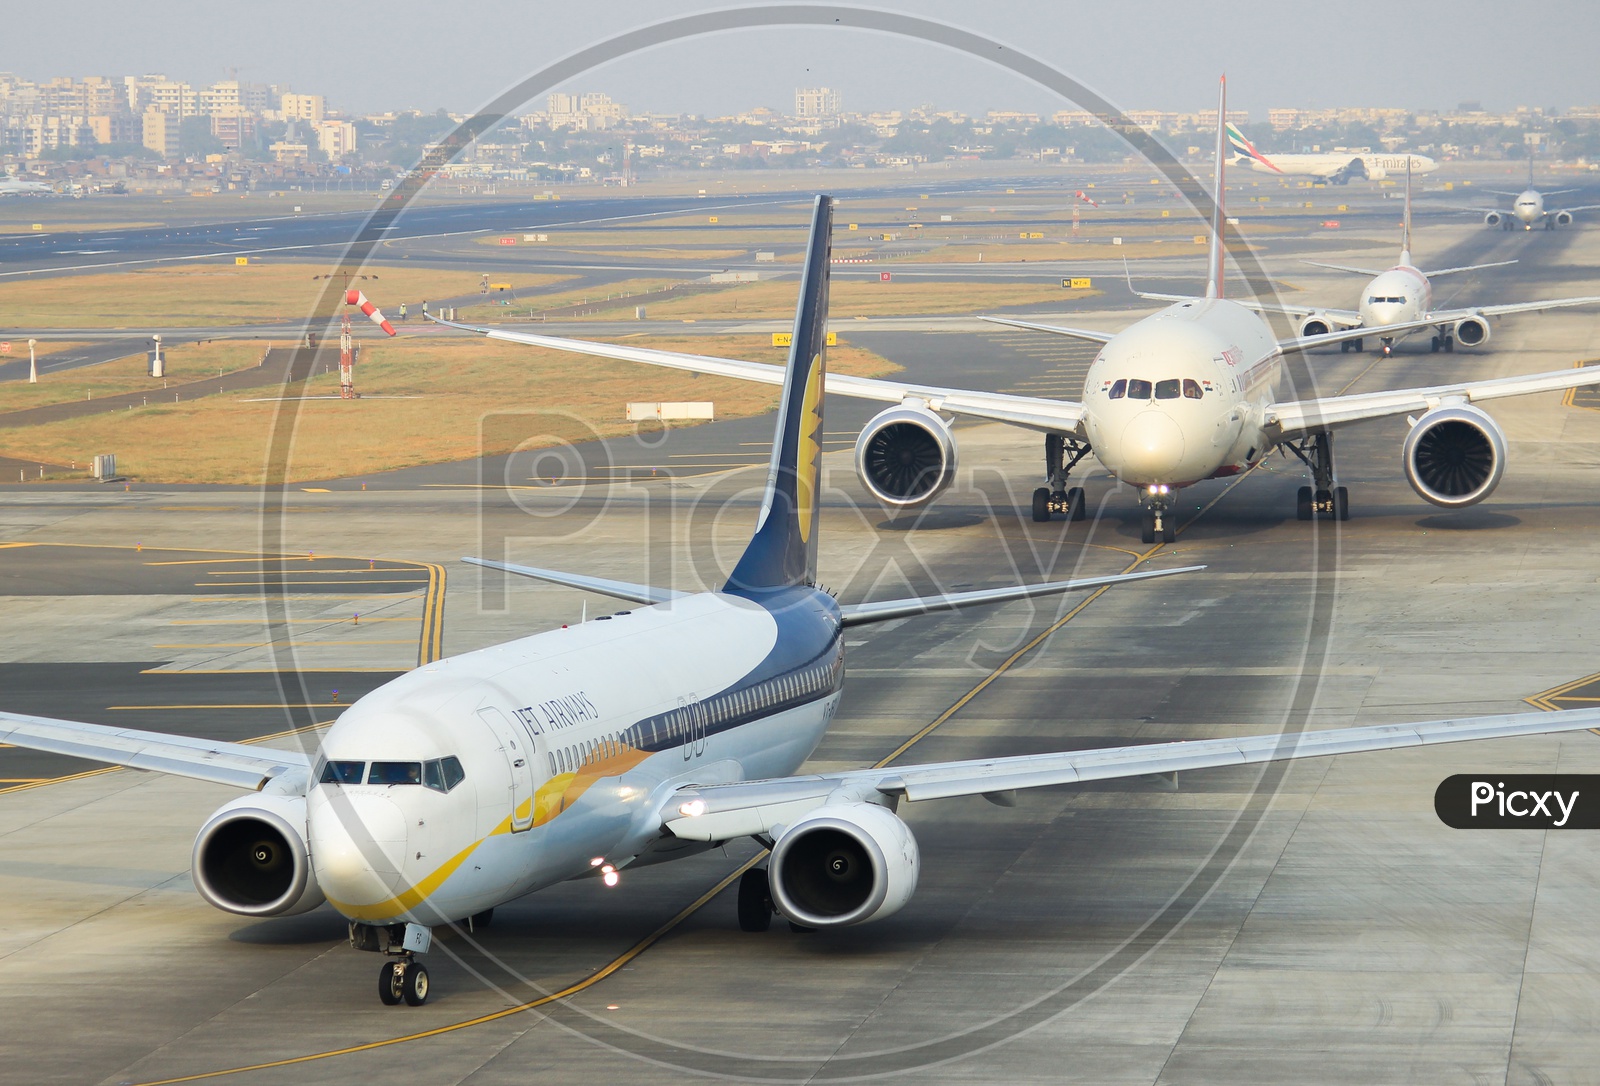 B737 from jetairways leading the departure lineup at BOM.